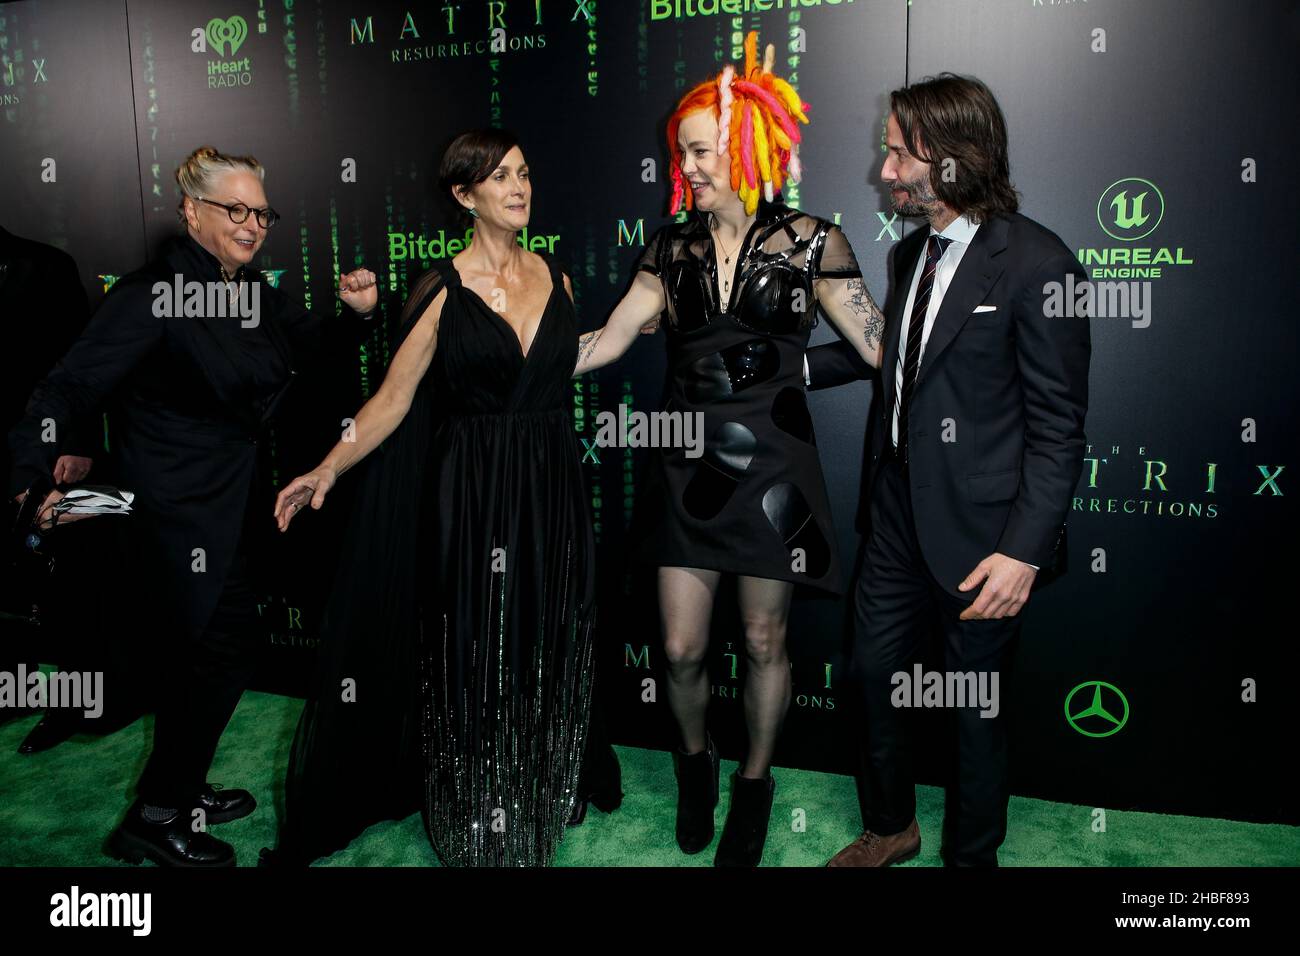 San Francisco, USA. 18th Dec, 2021. Karin Wachowski, Carrie-Anne Moss, Lana Wachowski and Keanu Reeves on the green carpet at the U.S. movie premier of The Matrix Resurrections at the Castro Theater on December, 18, 2021 in San Francisco, California. (Photo by Christopher Victorio/imageSPACE/Sipa USA) Credit: Sipa USA/Alamy Live News Stock Photo